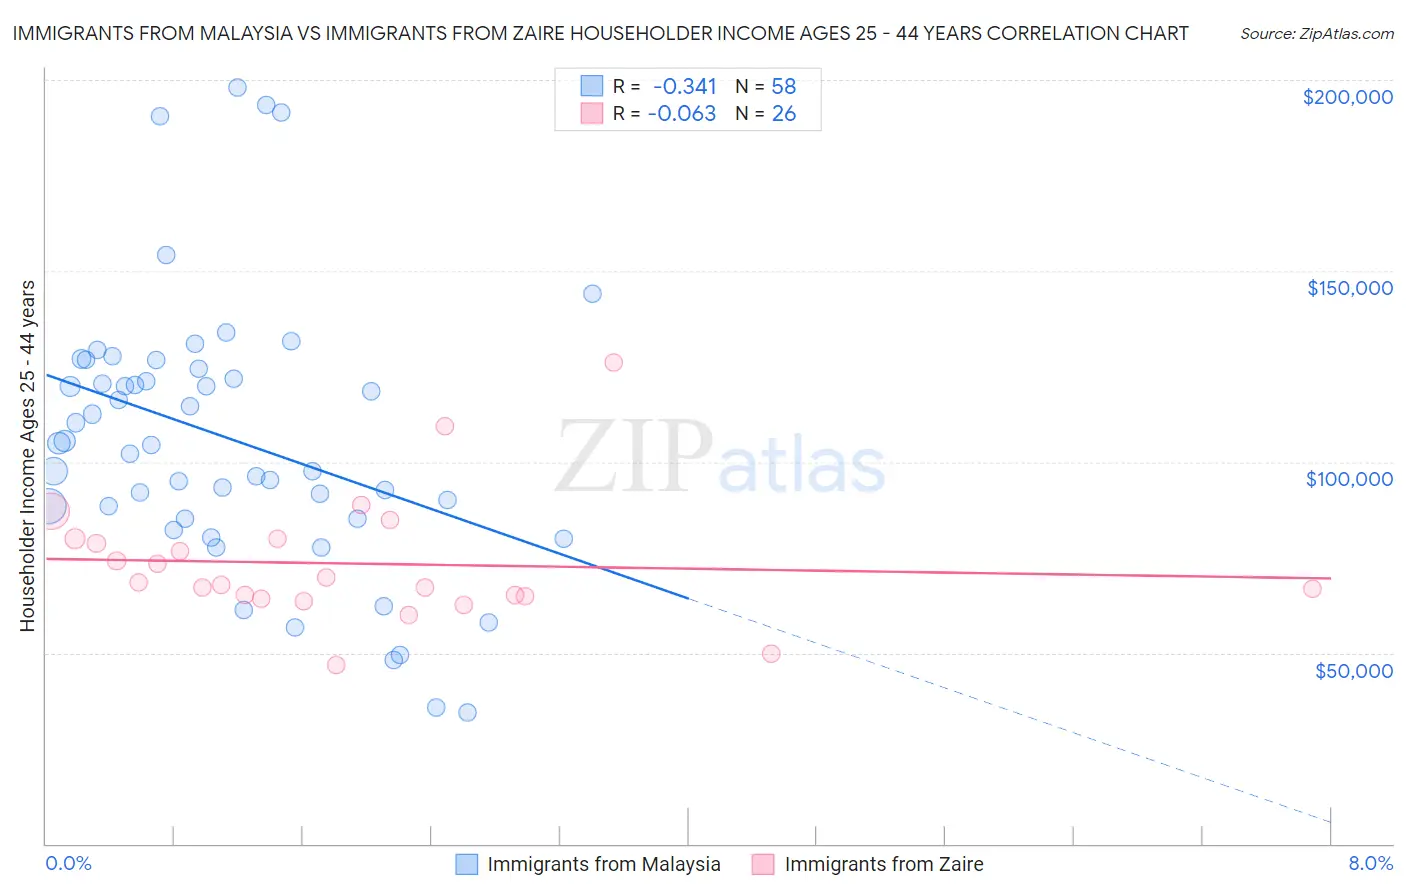 Immigrants from Malaysia vs Immigrants from Zaire Householder Income Ages 25 - 44 years